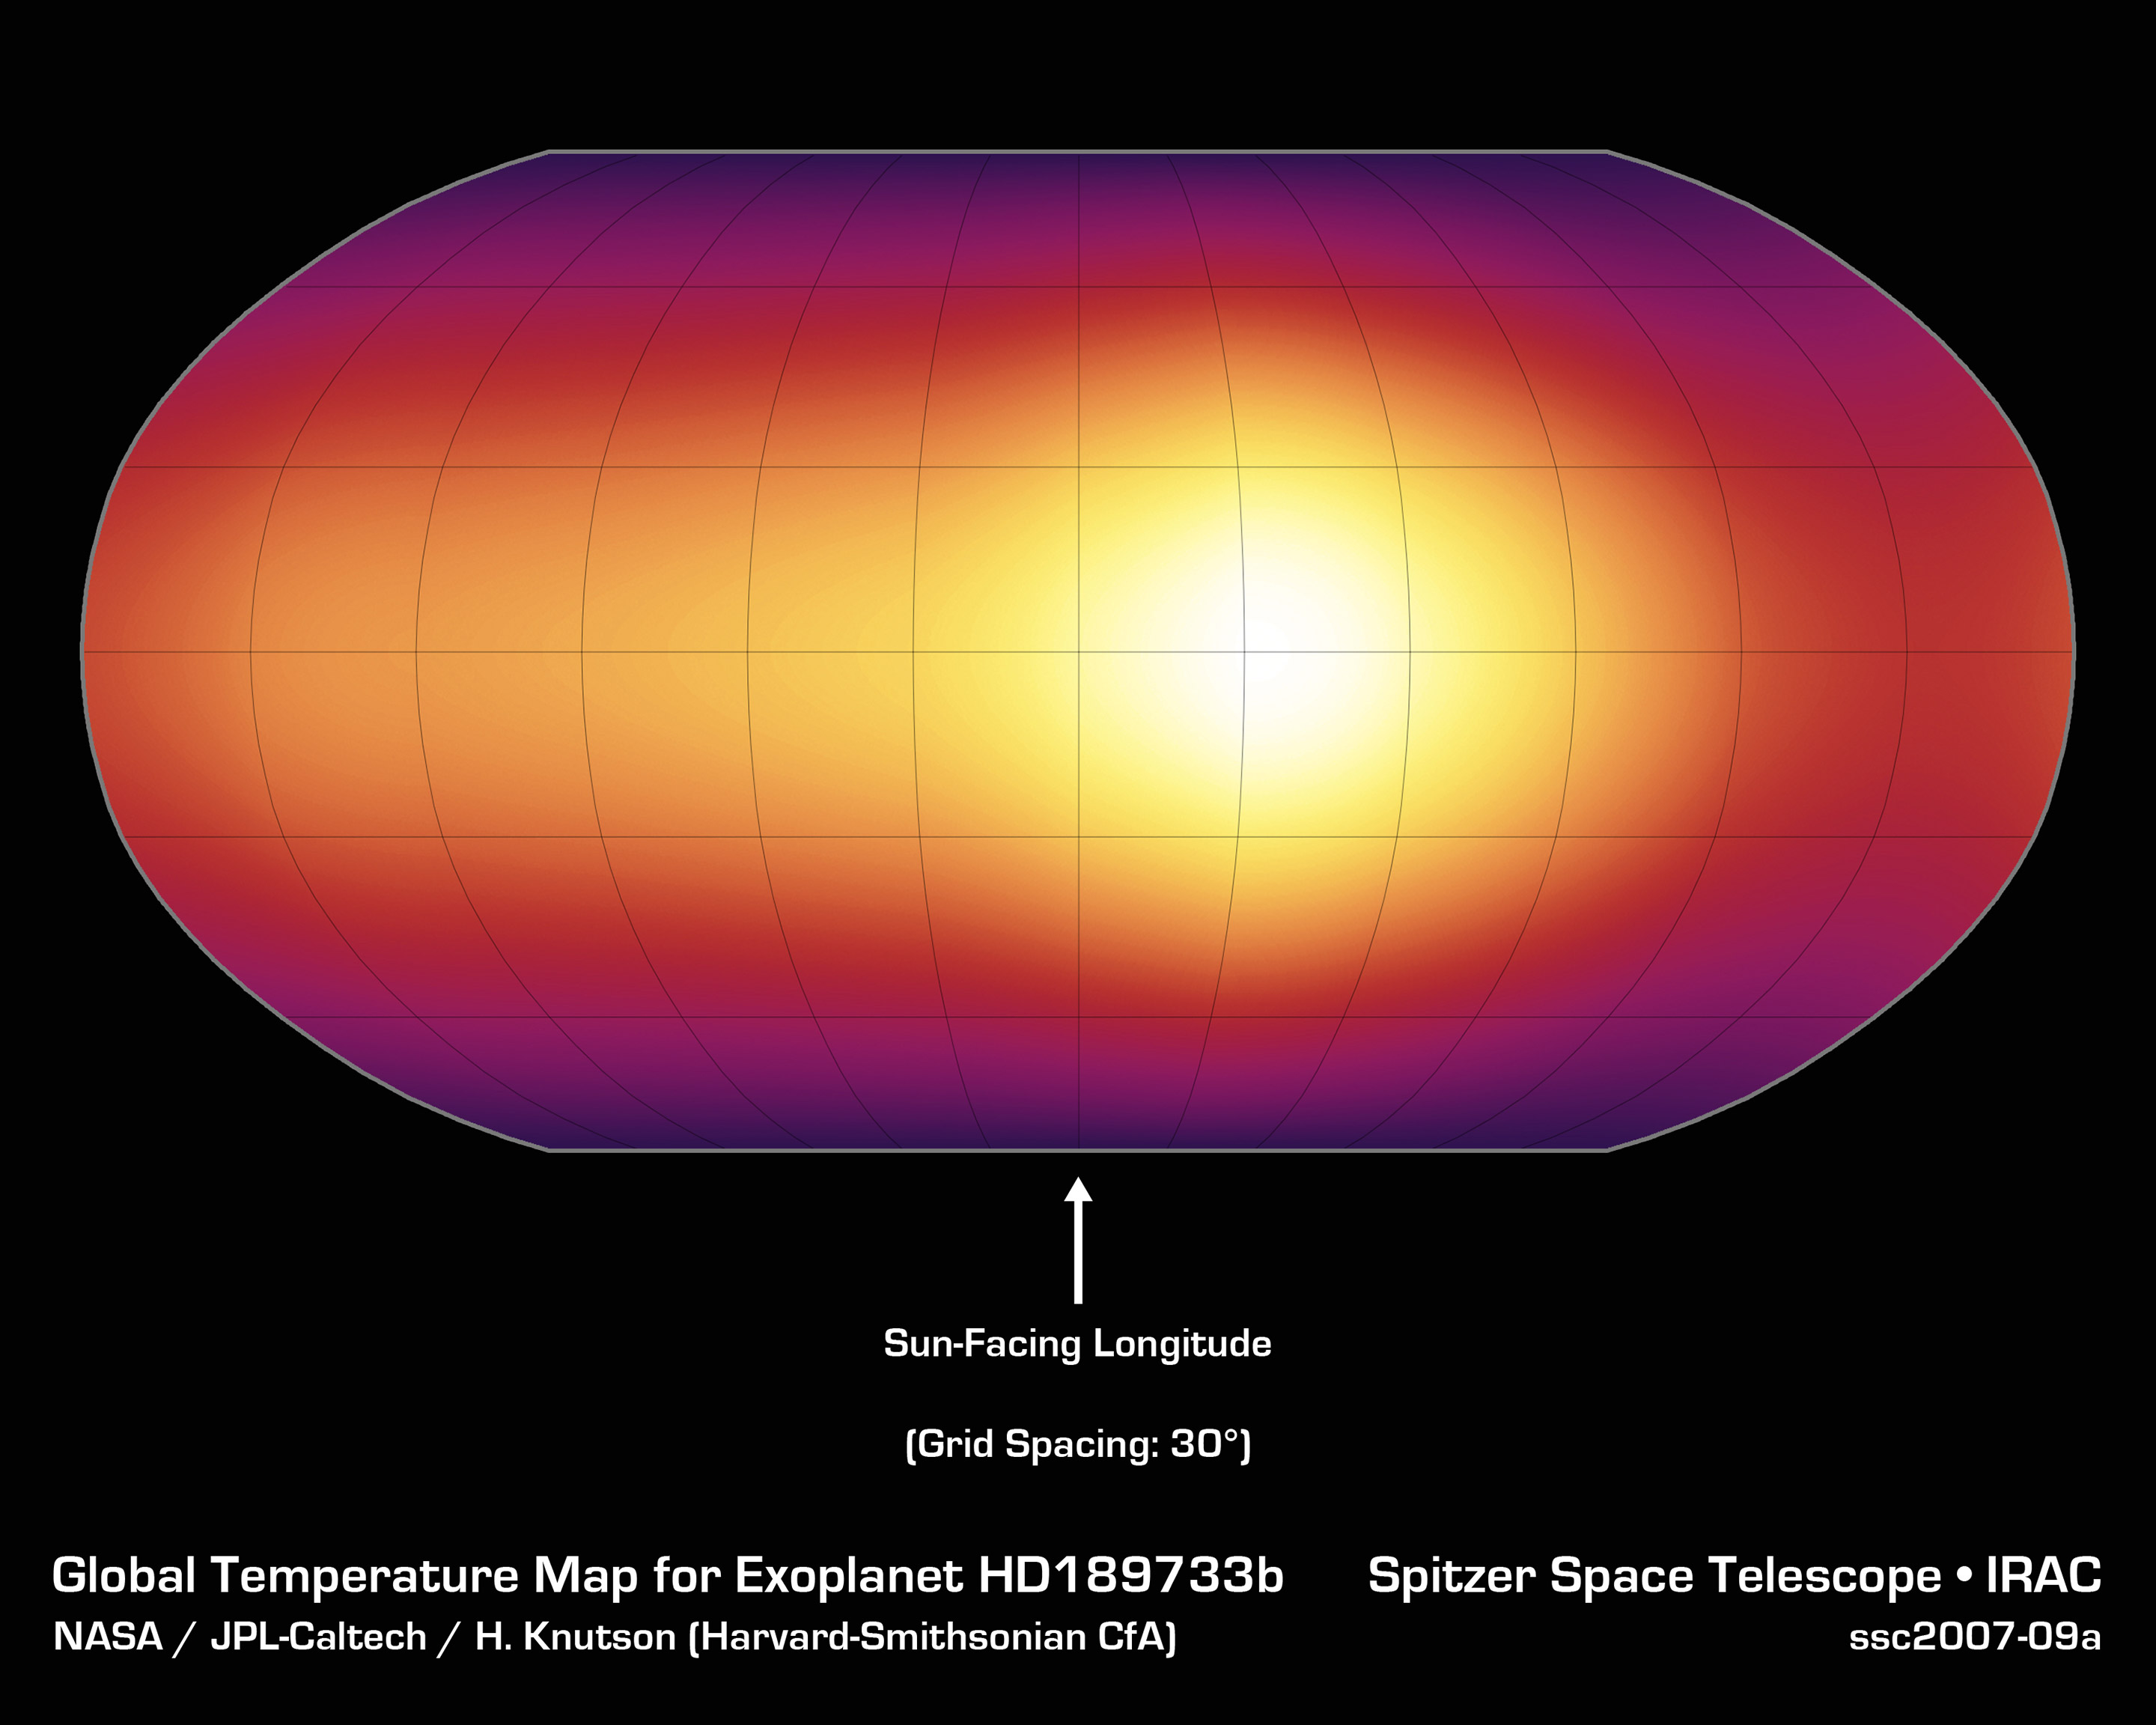 Alien Globe: This image shows the first-ever map of the surface of an exoplanet, or a planet beyond our solar system. The map, which shows temperature variations across the cloudy tops of a gas giant called HD 189733b, is made up of infrared data taken the Spitzer. Hotter temperatures are represented in brighter colors. Credit: NASA/JPL-Caltech/Harvard-Smithsonian CfA